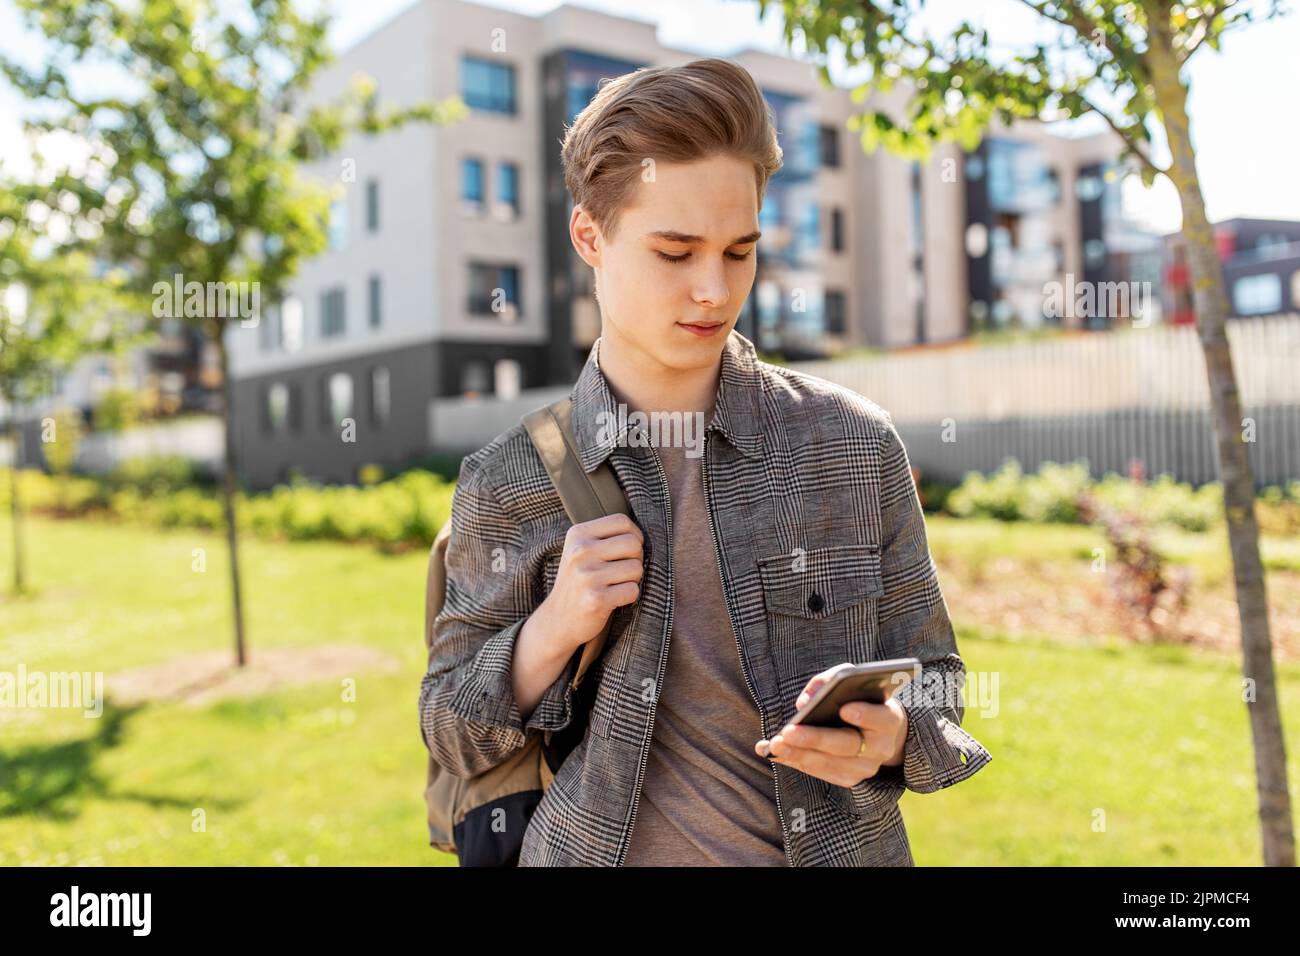 teenage student boy with phone and bag in city Stock Photo